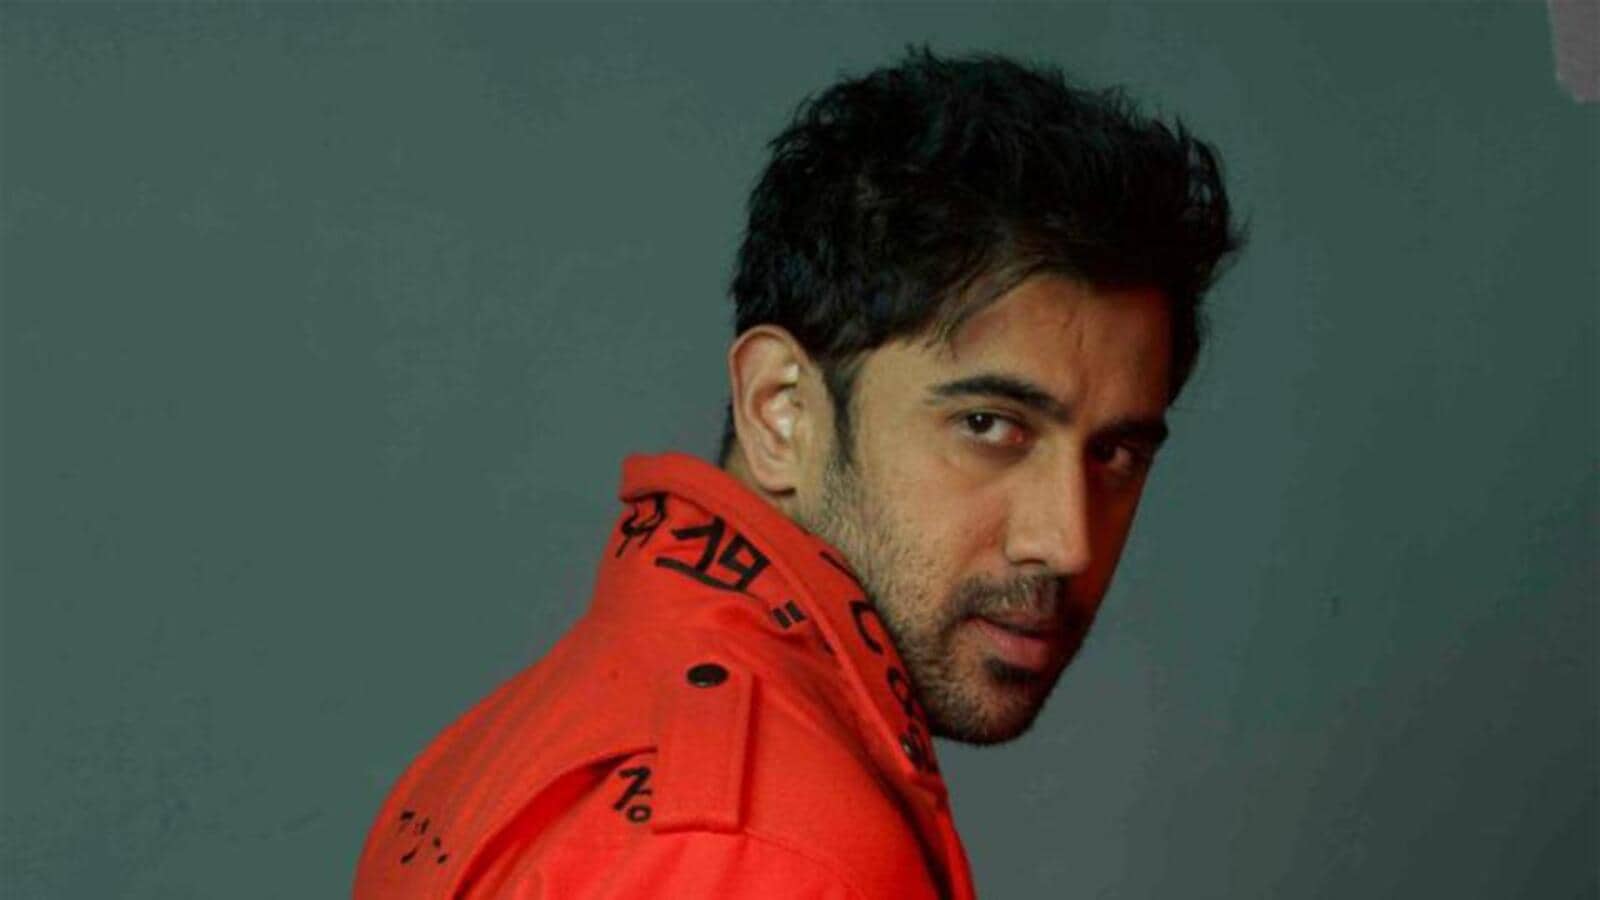 Amit Sadh: A lot of hue and cry about remakes and adaptations, audience doesn’t give a damn